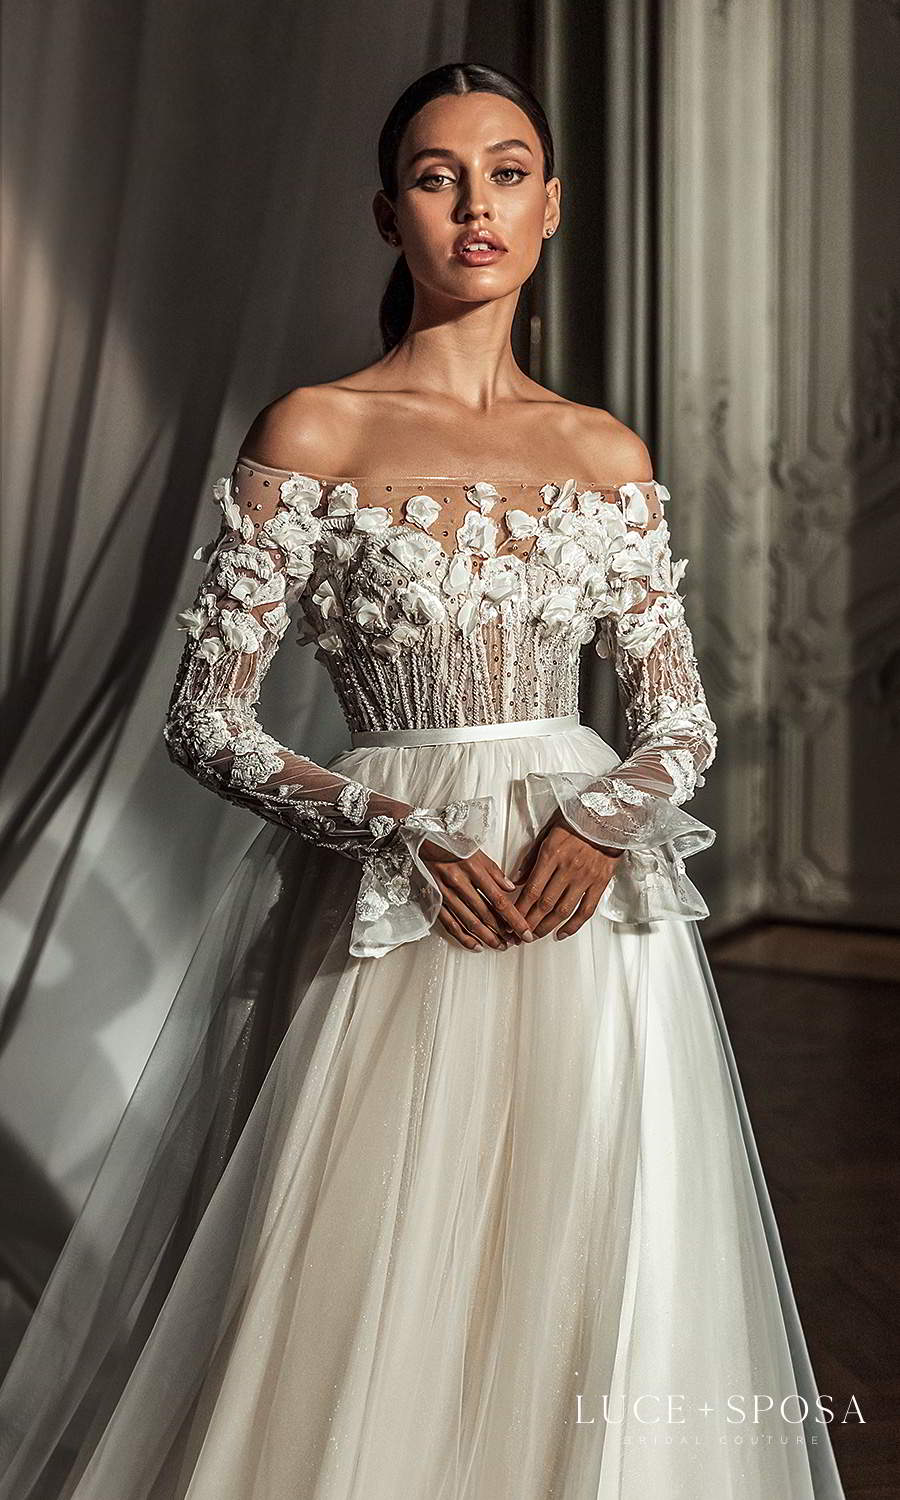 Luce Sposa 2021 “Shades of Couture” Wedding Dresses